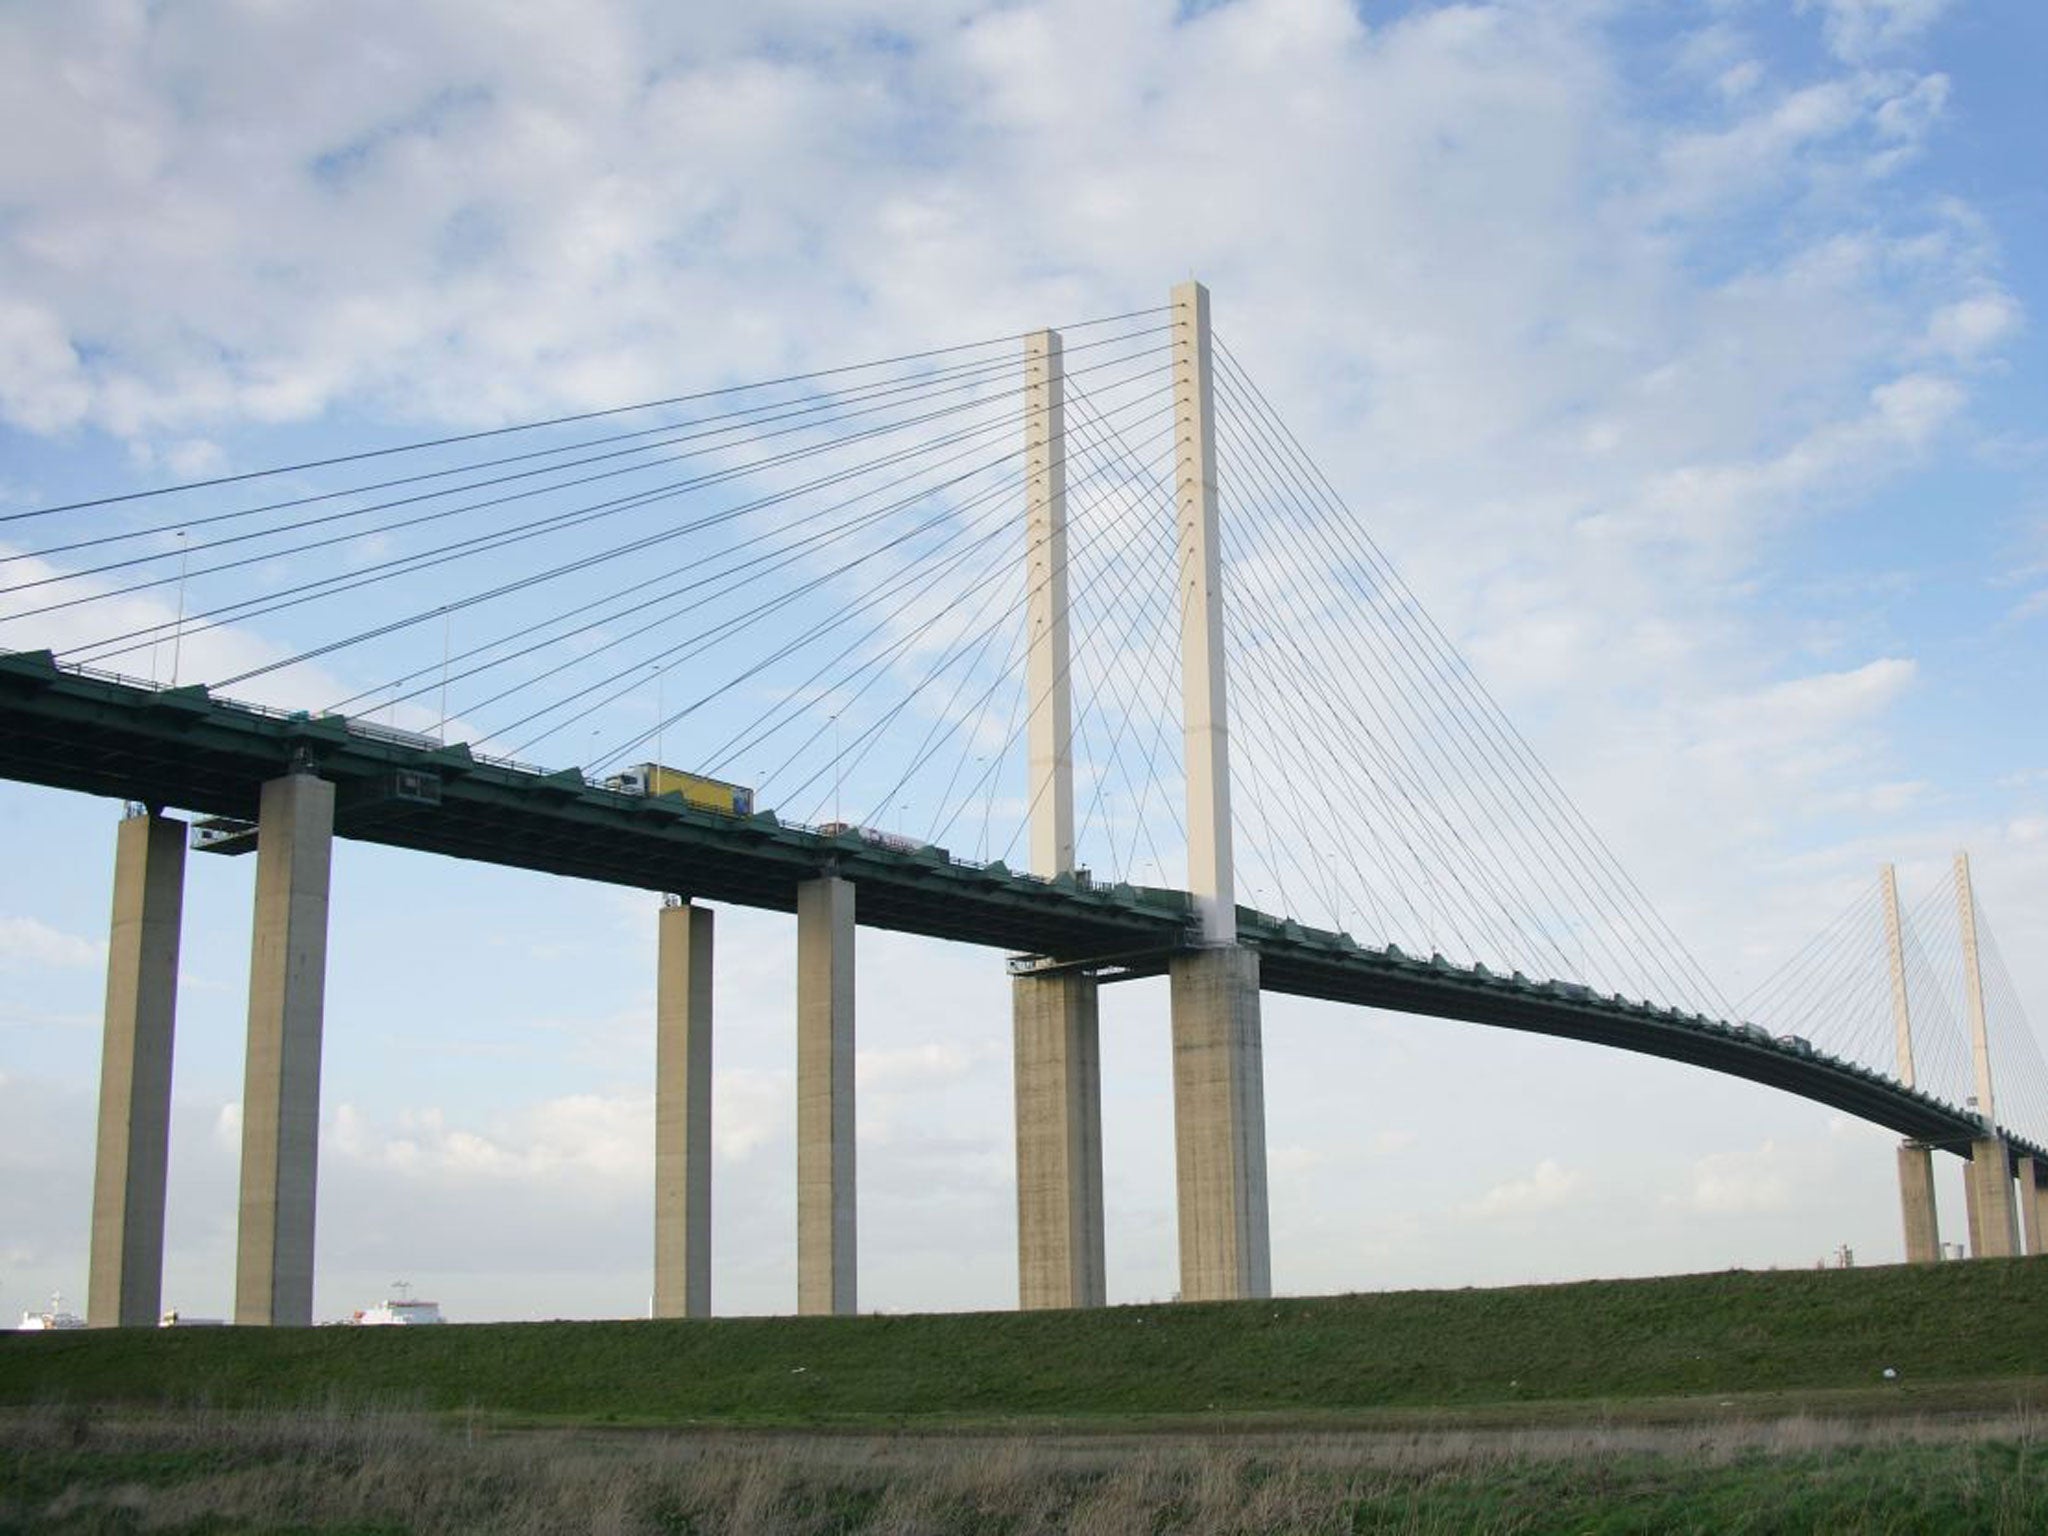 Prepaid journeys on the Dartford Crossing have proved to be complicated - and sometimes costly